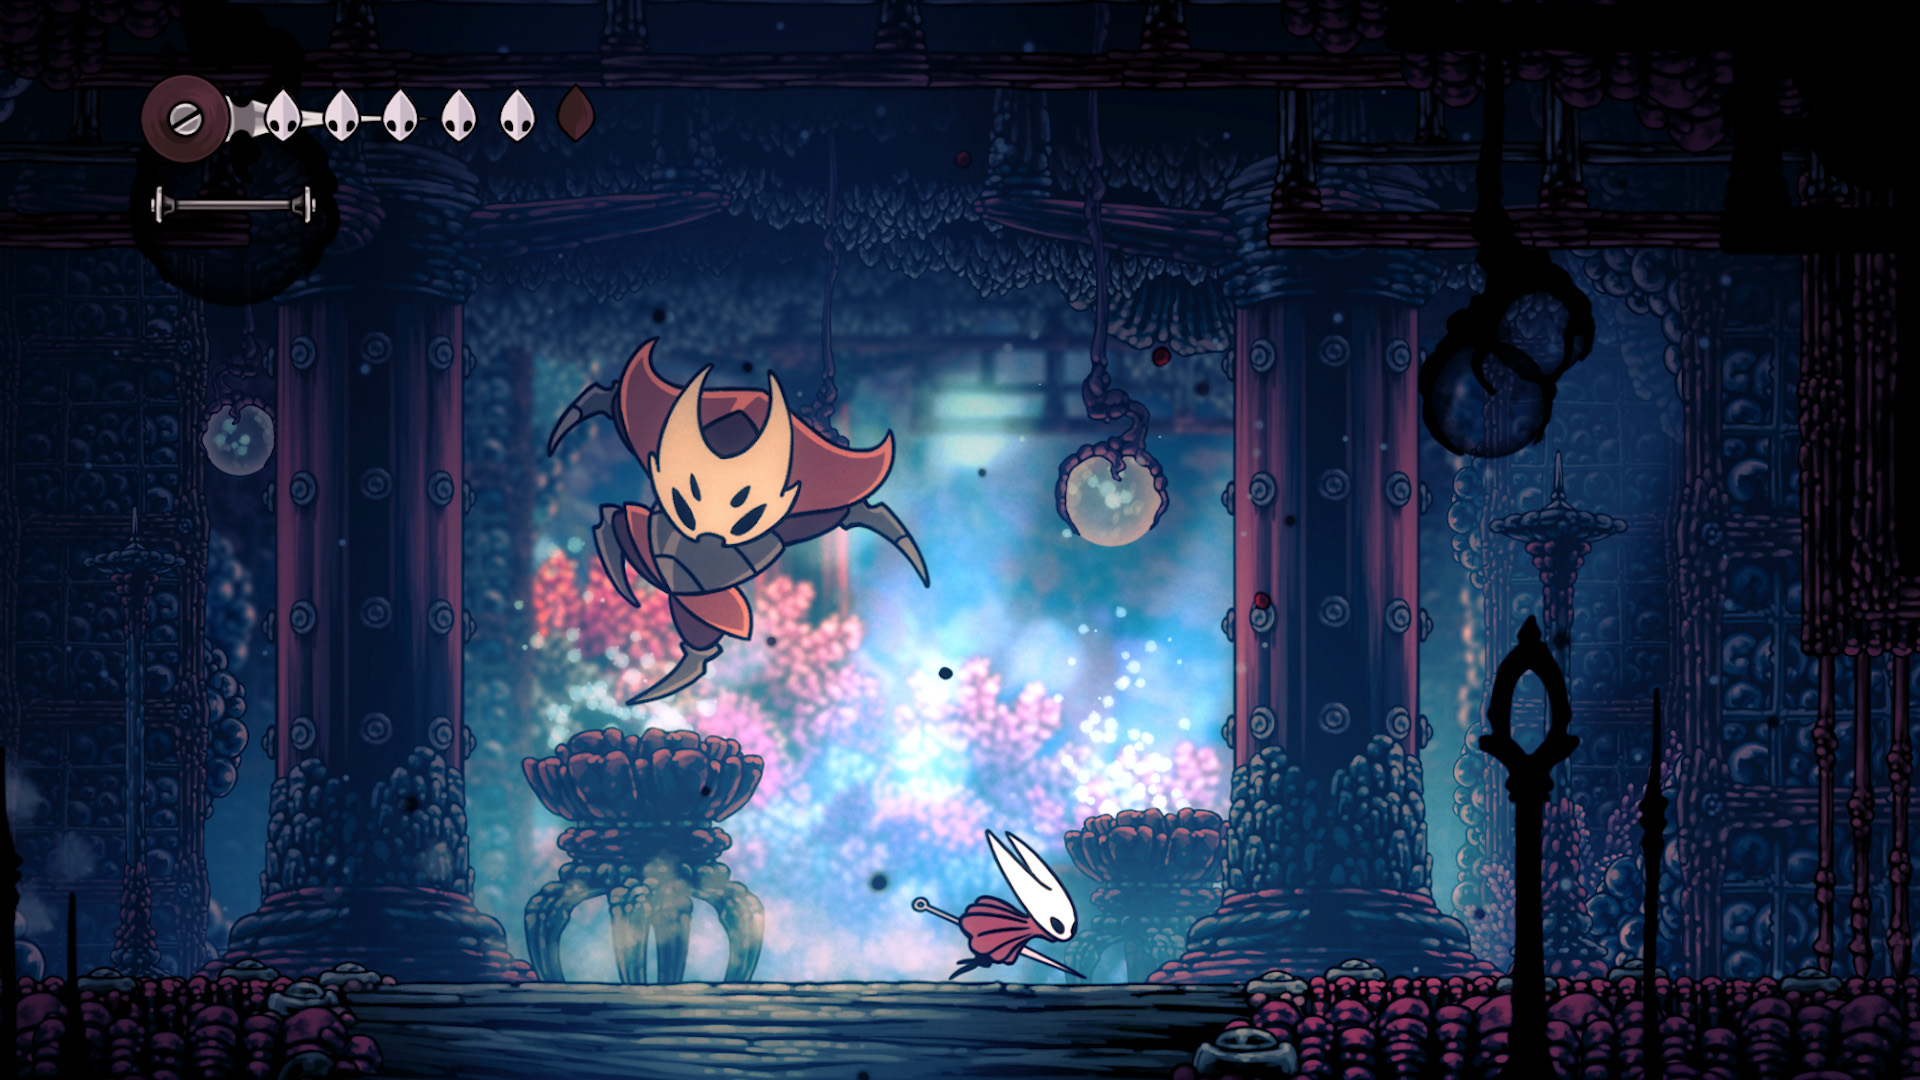 for mac download Hollow Knight: Silksong